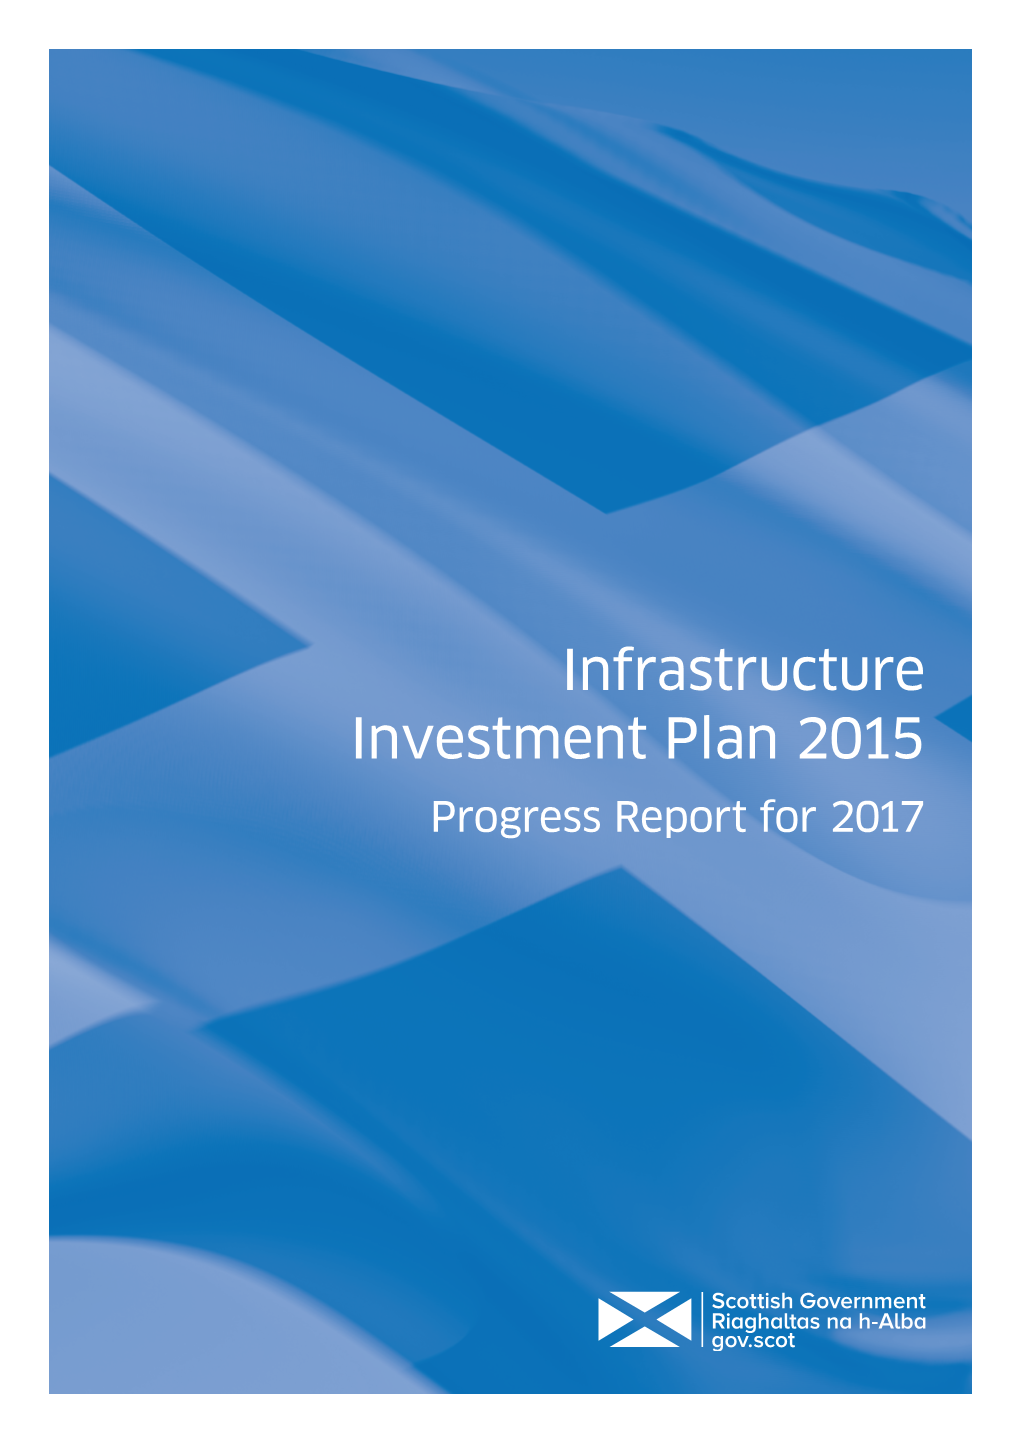 Infrastructure Investment Plan 2015 Progress Report for 2017